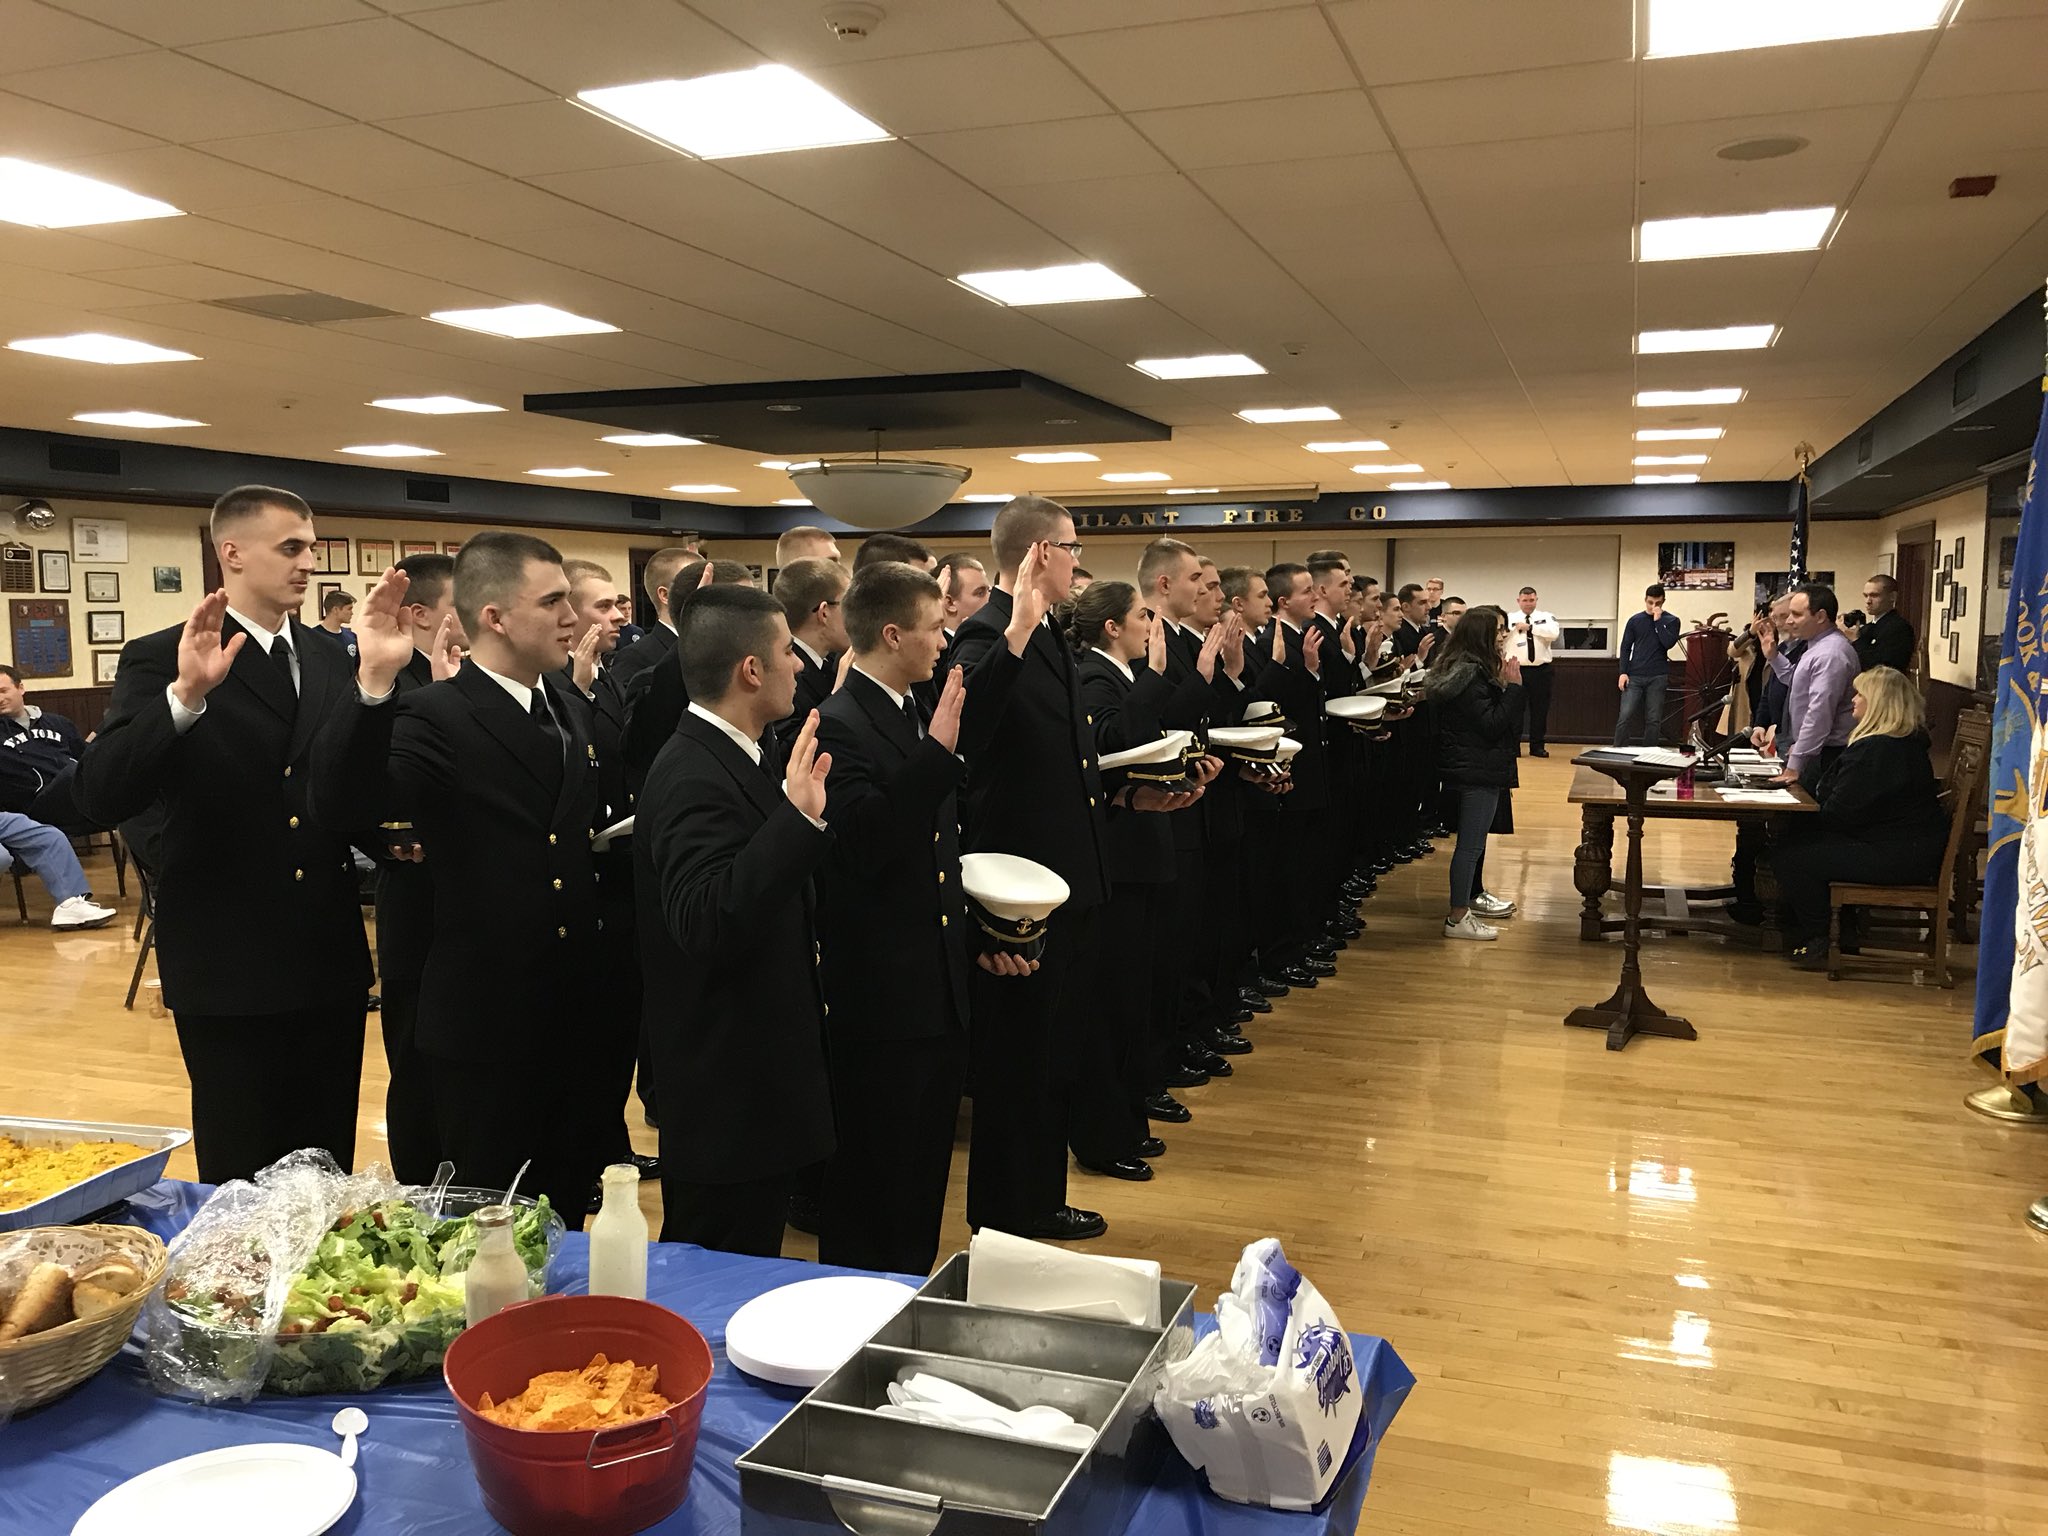 47 midshipmen were sworn in as auxiliary emergency medical technicians with Vigilant Fire Company in Great Neck. (Photo courtesy of Vigilant Fire Company)